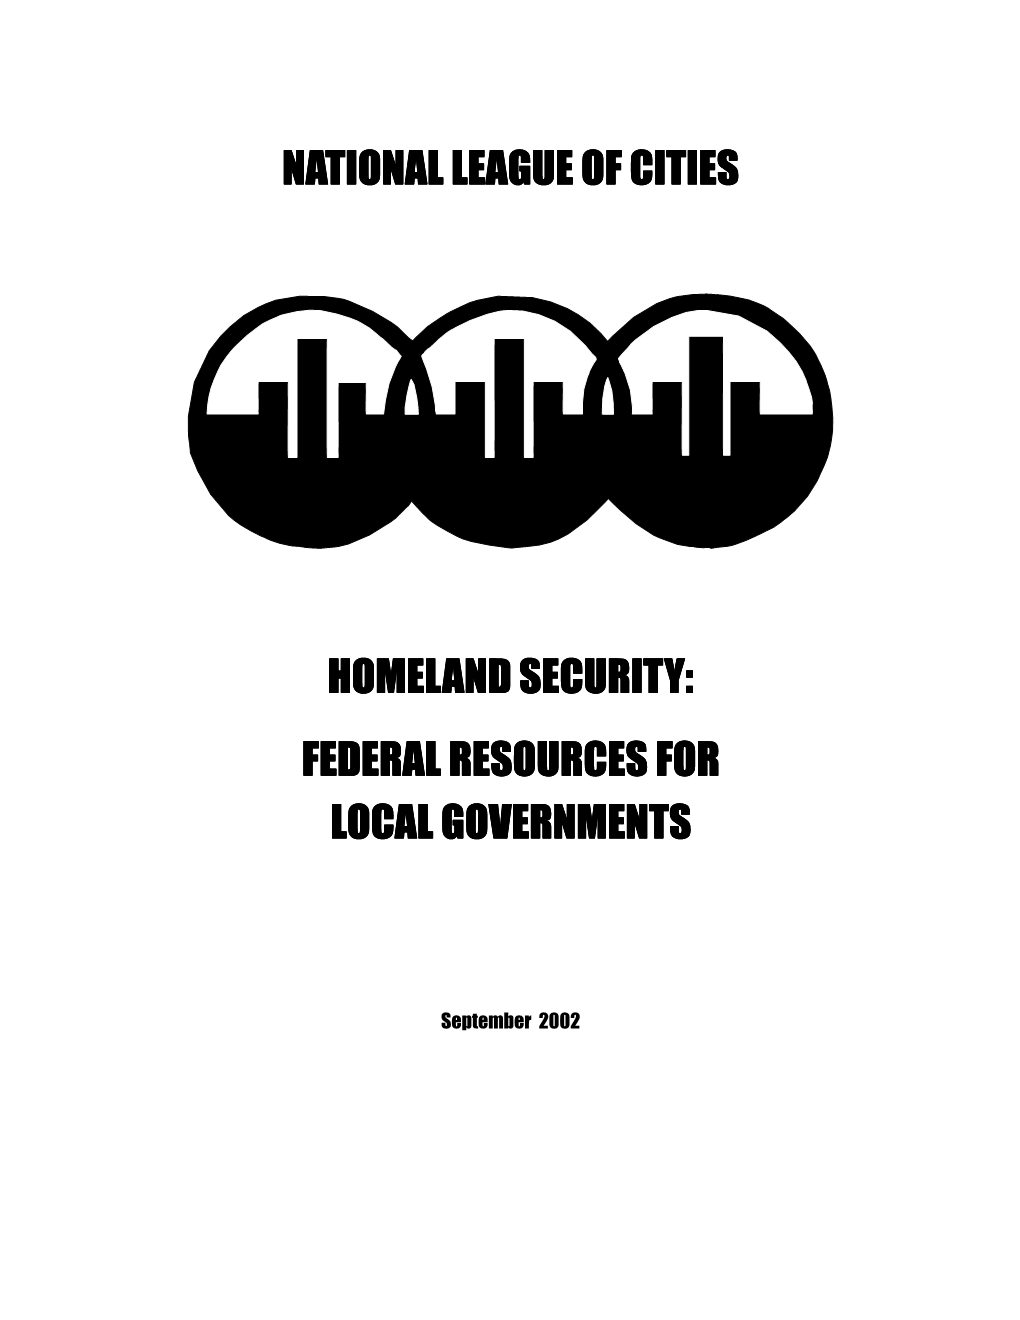 Homeland Security: Federal Resources for Local Governments